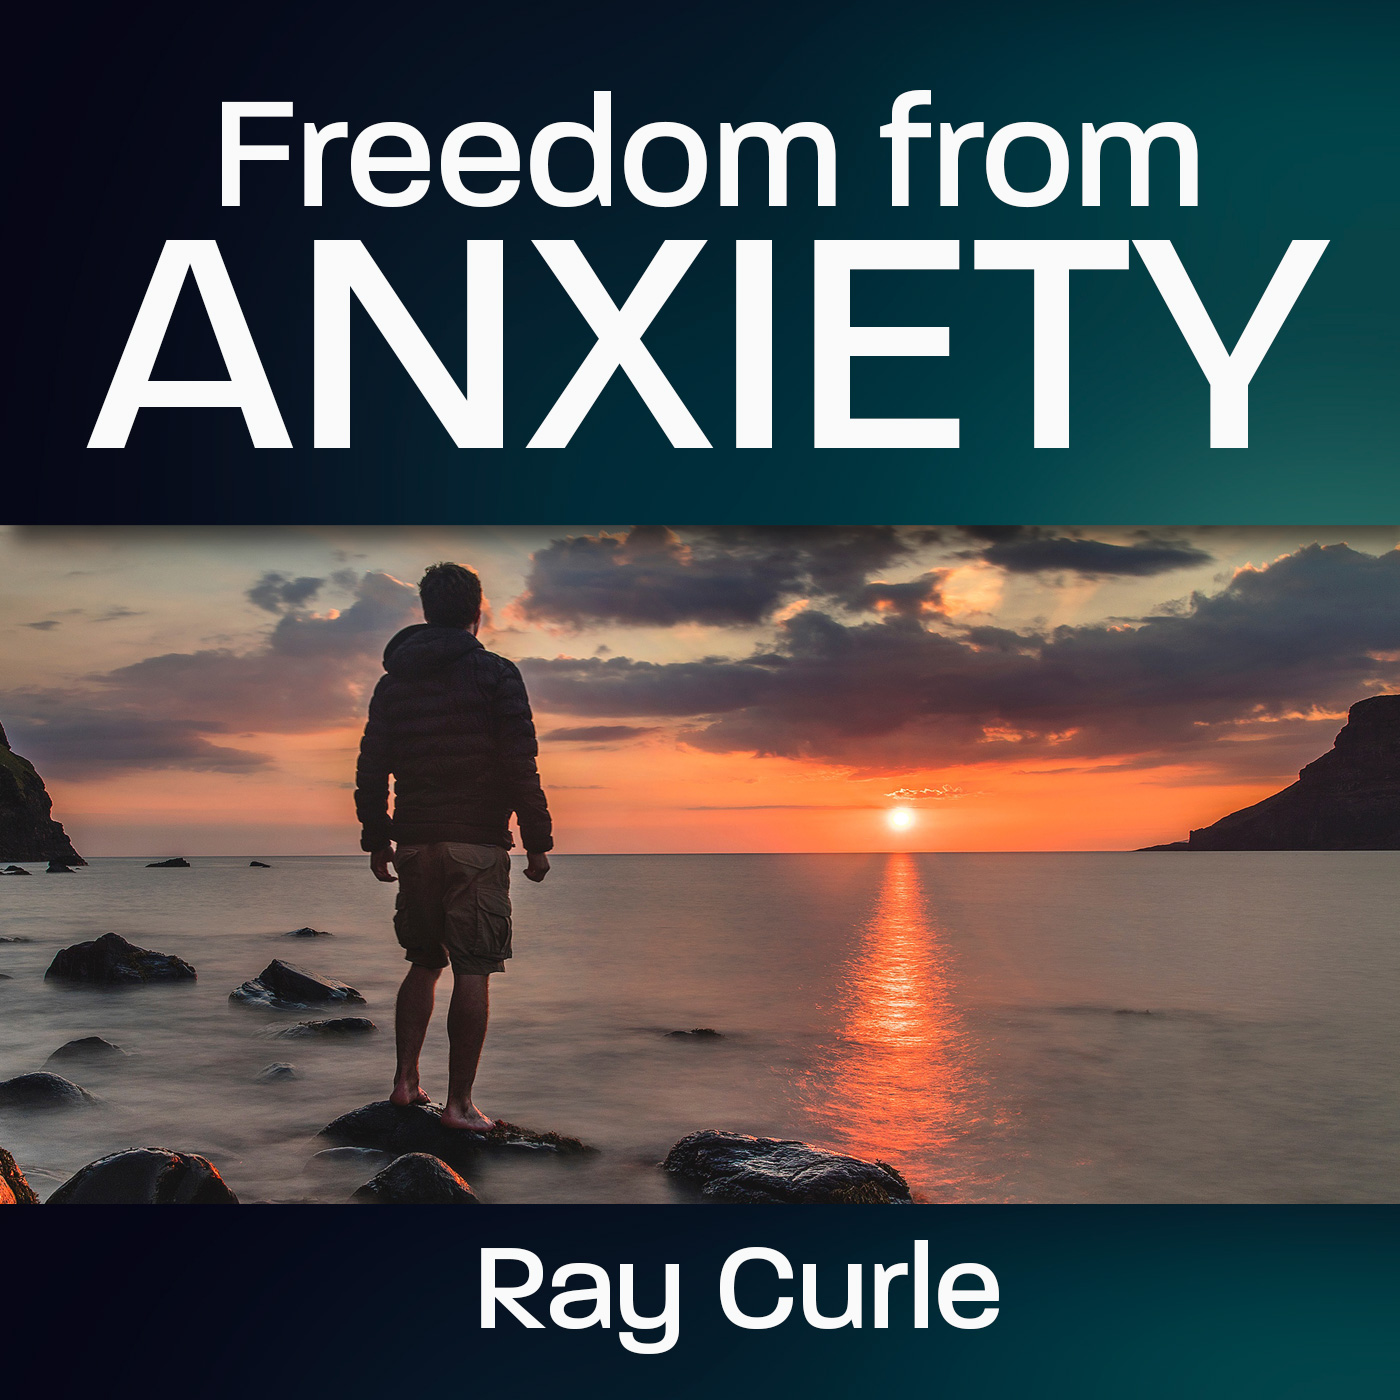 Freedom from Anxiety by Ray Curle